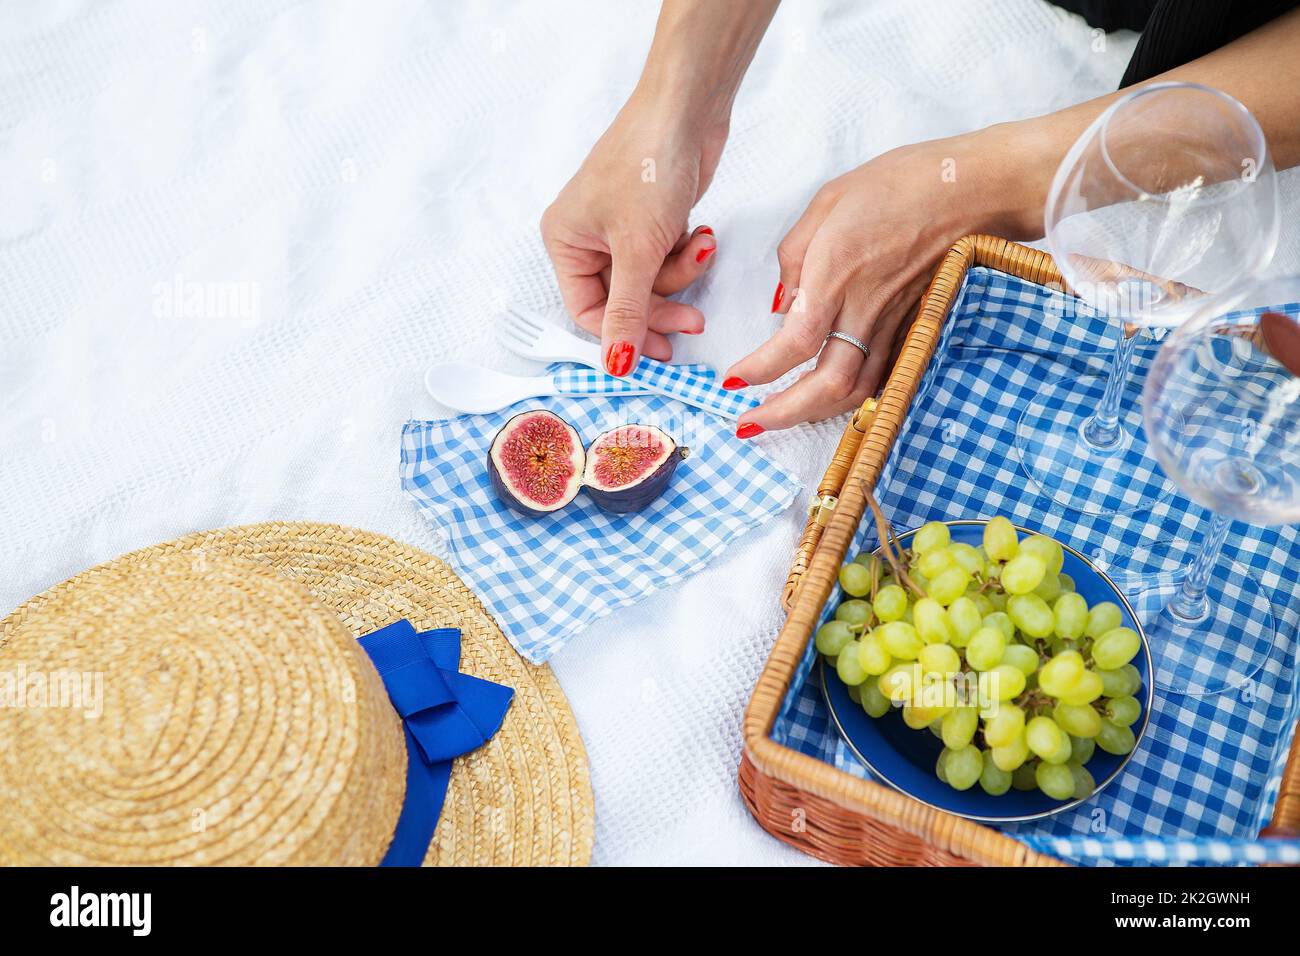 Romantic picnic in the park on the grass, delicious food: basket, wine, grapes, figs, cheese, blue checkered tablecloth, two glasses of wine. Girl cuts figs.Outdoor recreation concept. Stock Photo